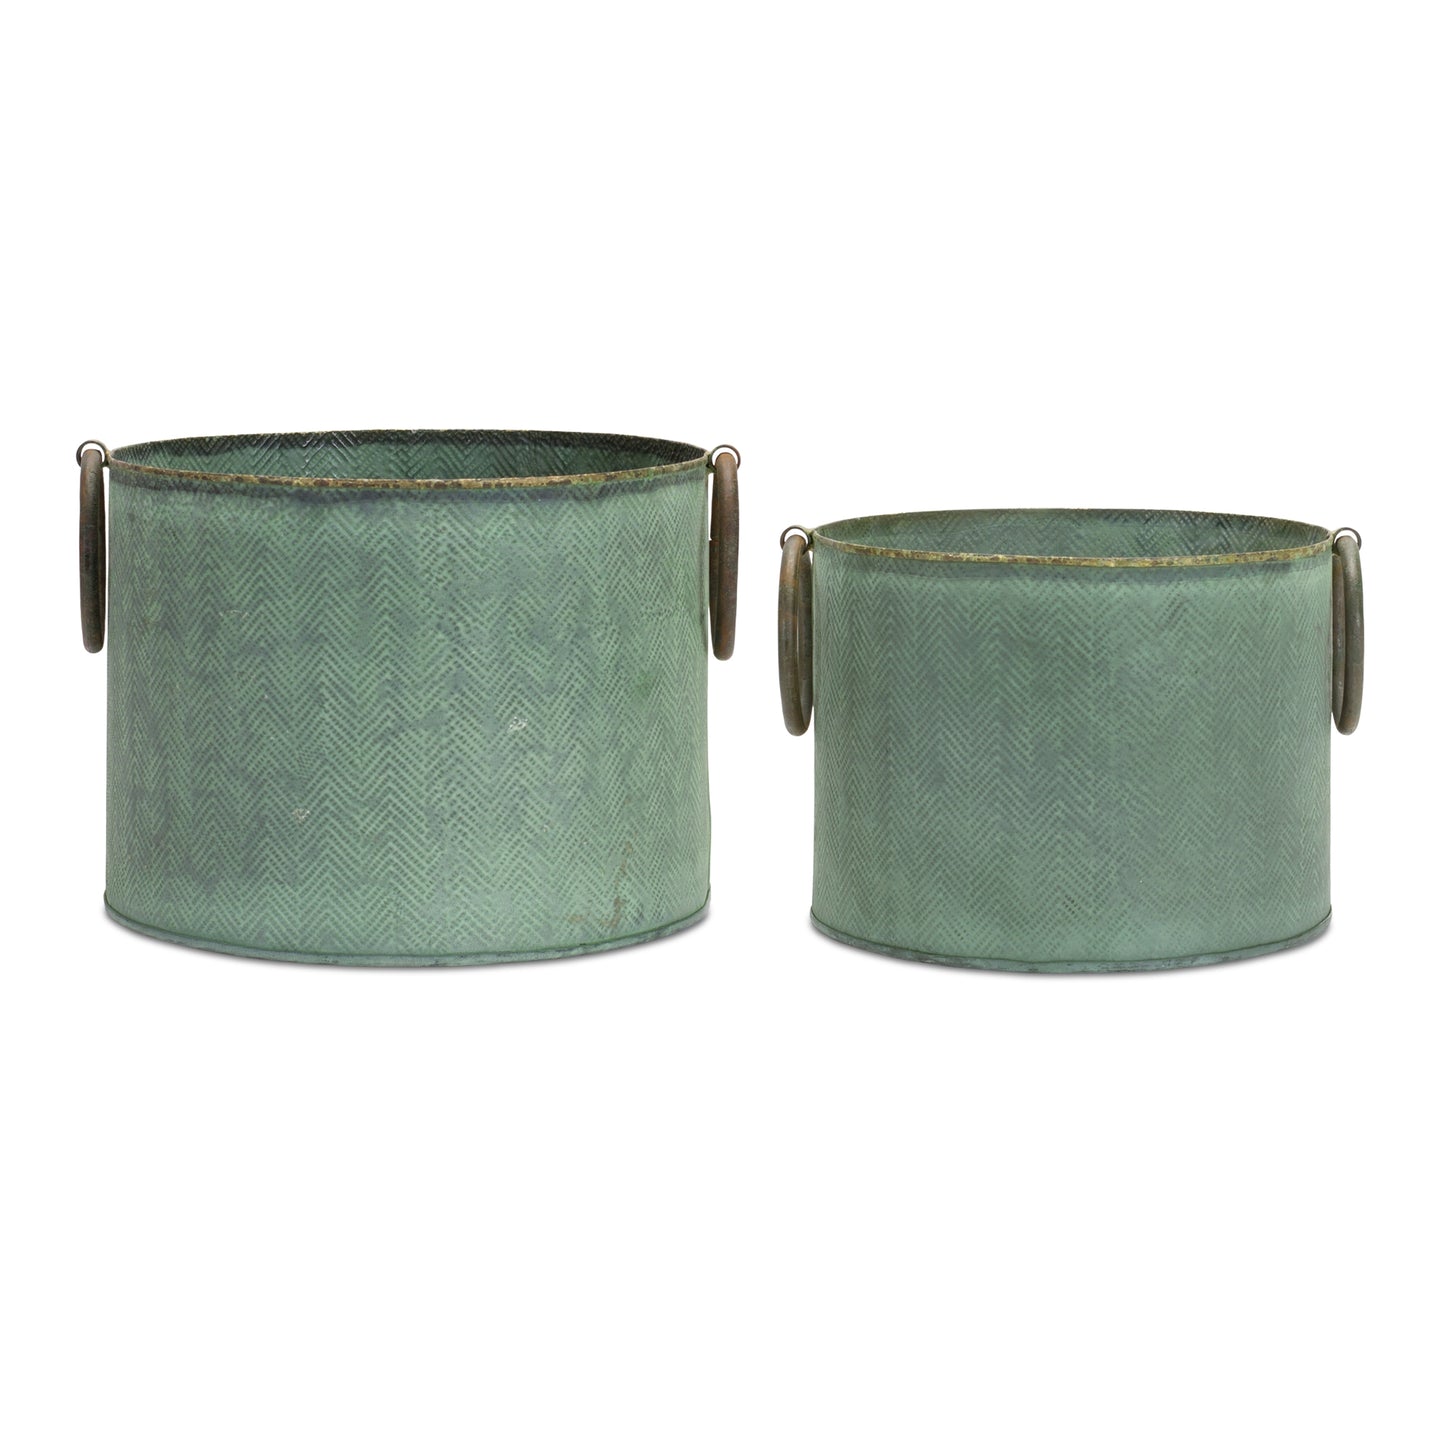 Round Metal Tub Platner with Distressed Green Finish (Set of 2)